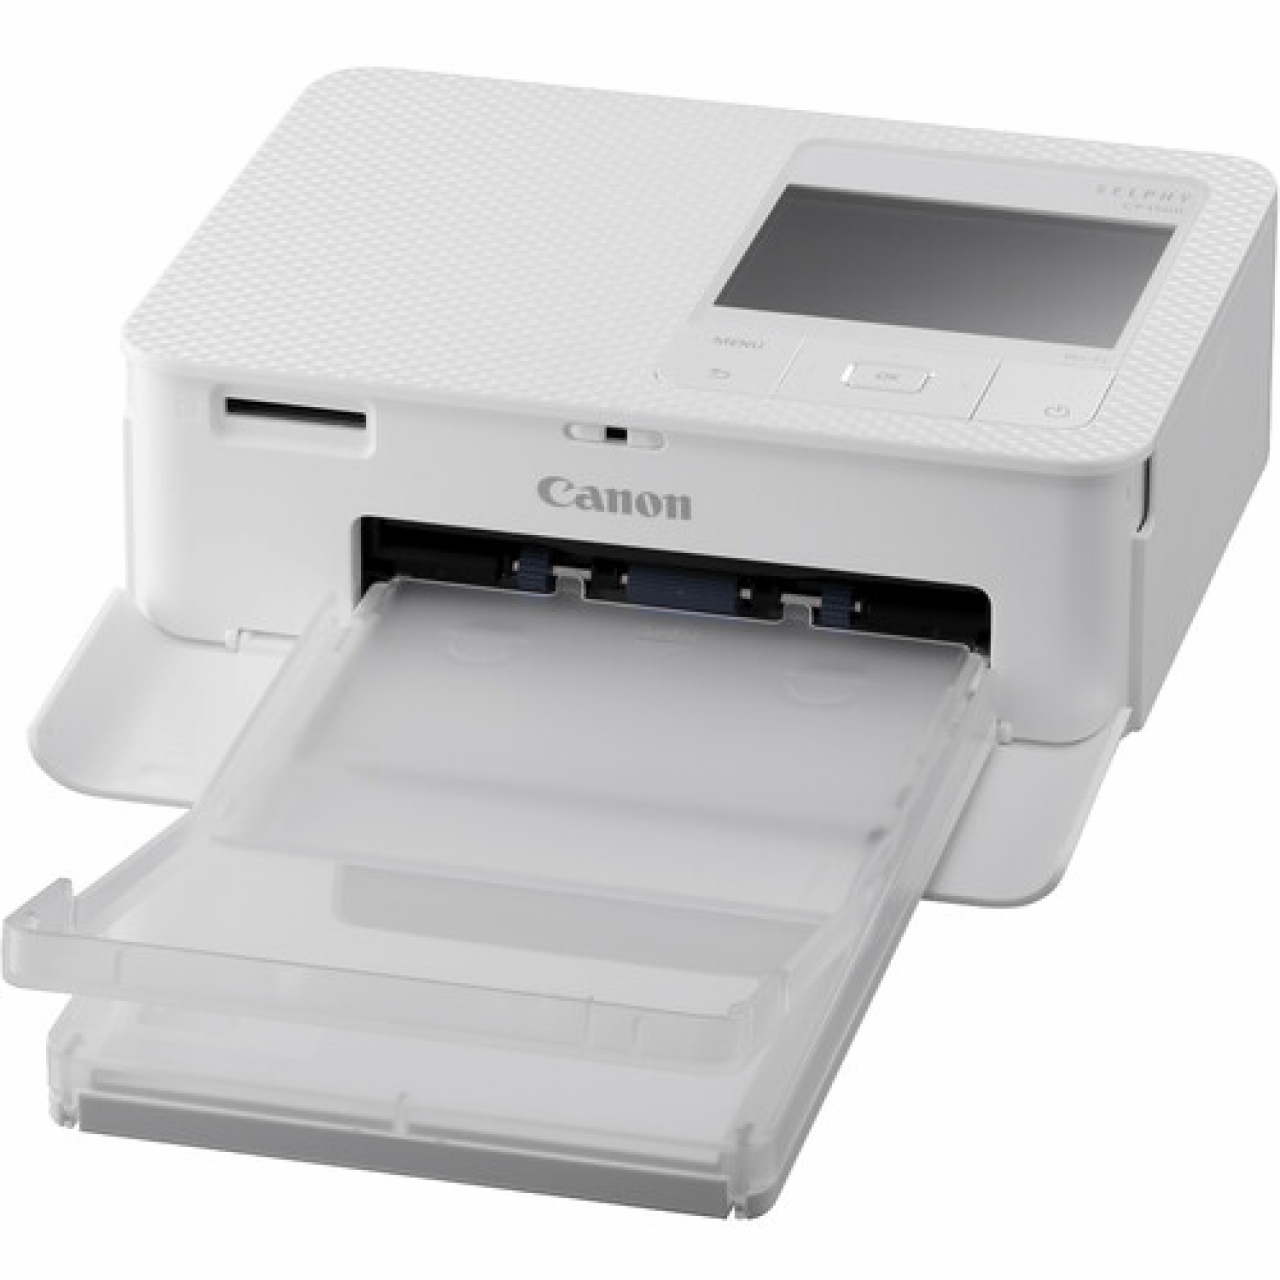  Canon SELPHY CP1300 Wireless Compact Photo Printer, White -  Bundle with USB Cable 6', Microfiber Cloth : Office Products